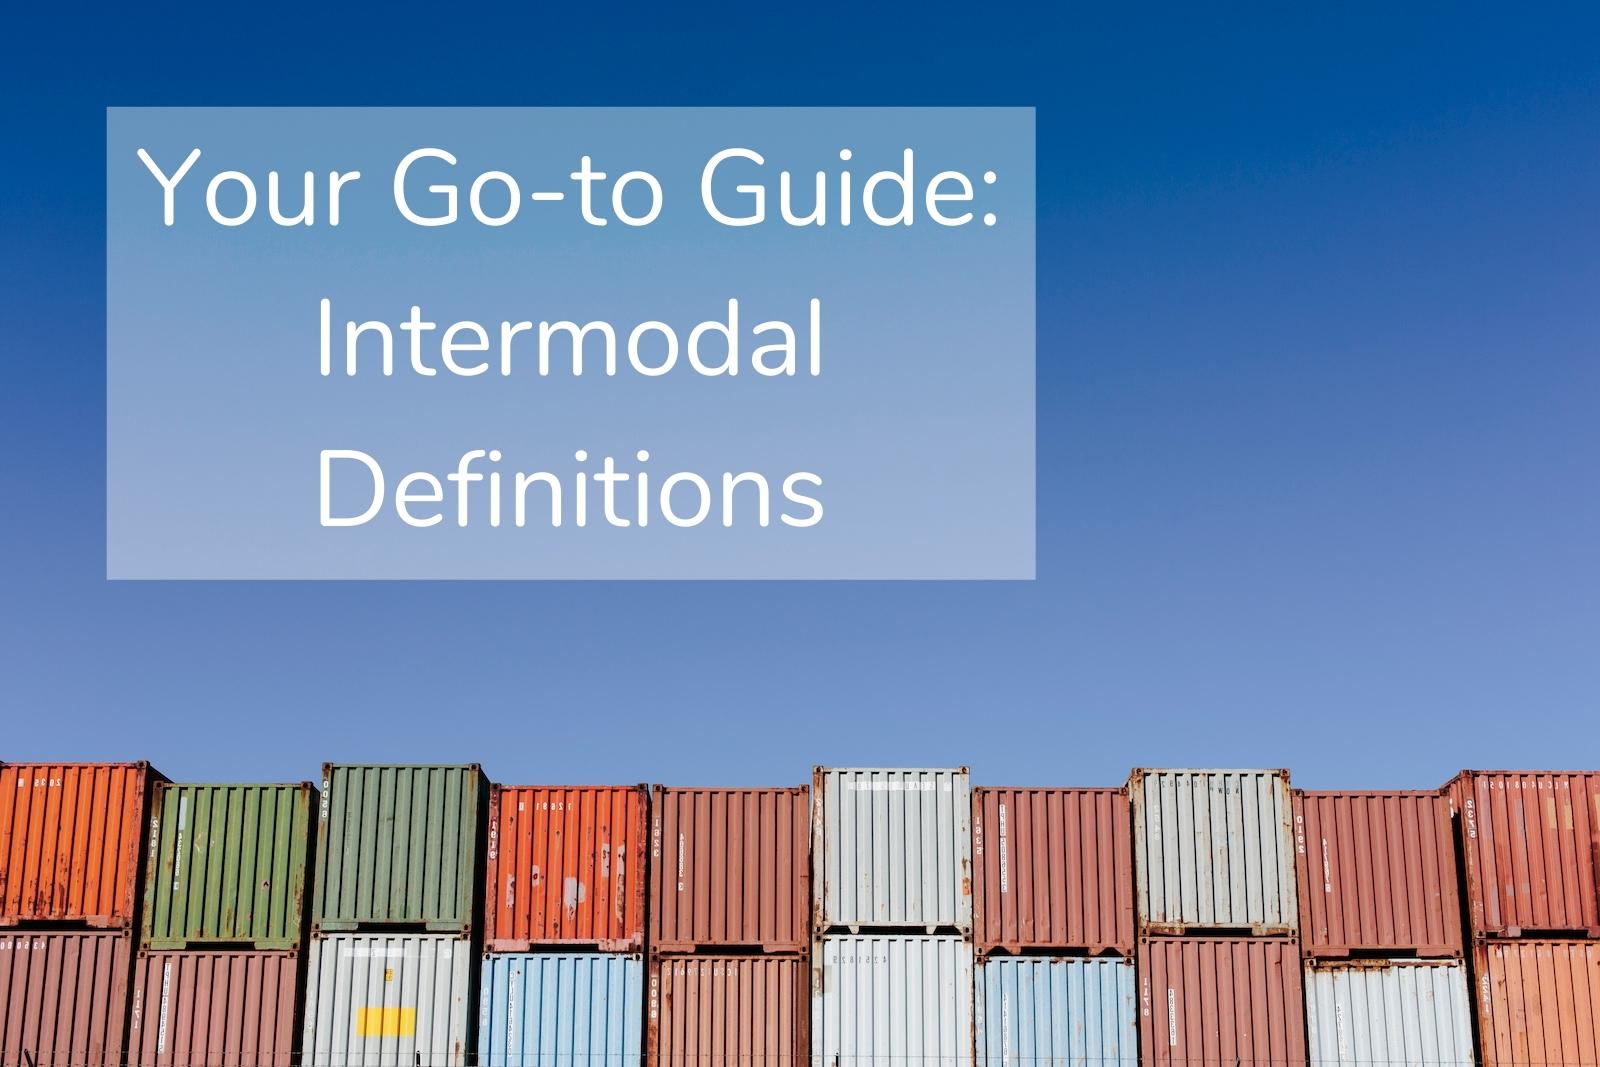 Intermodal Definition concept with stacks of containers against a blue sky